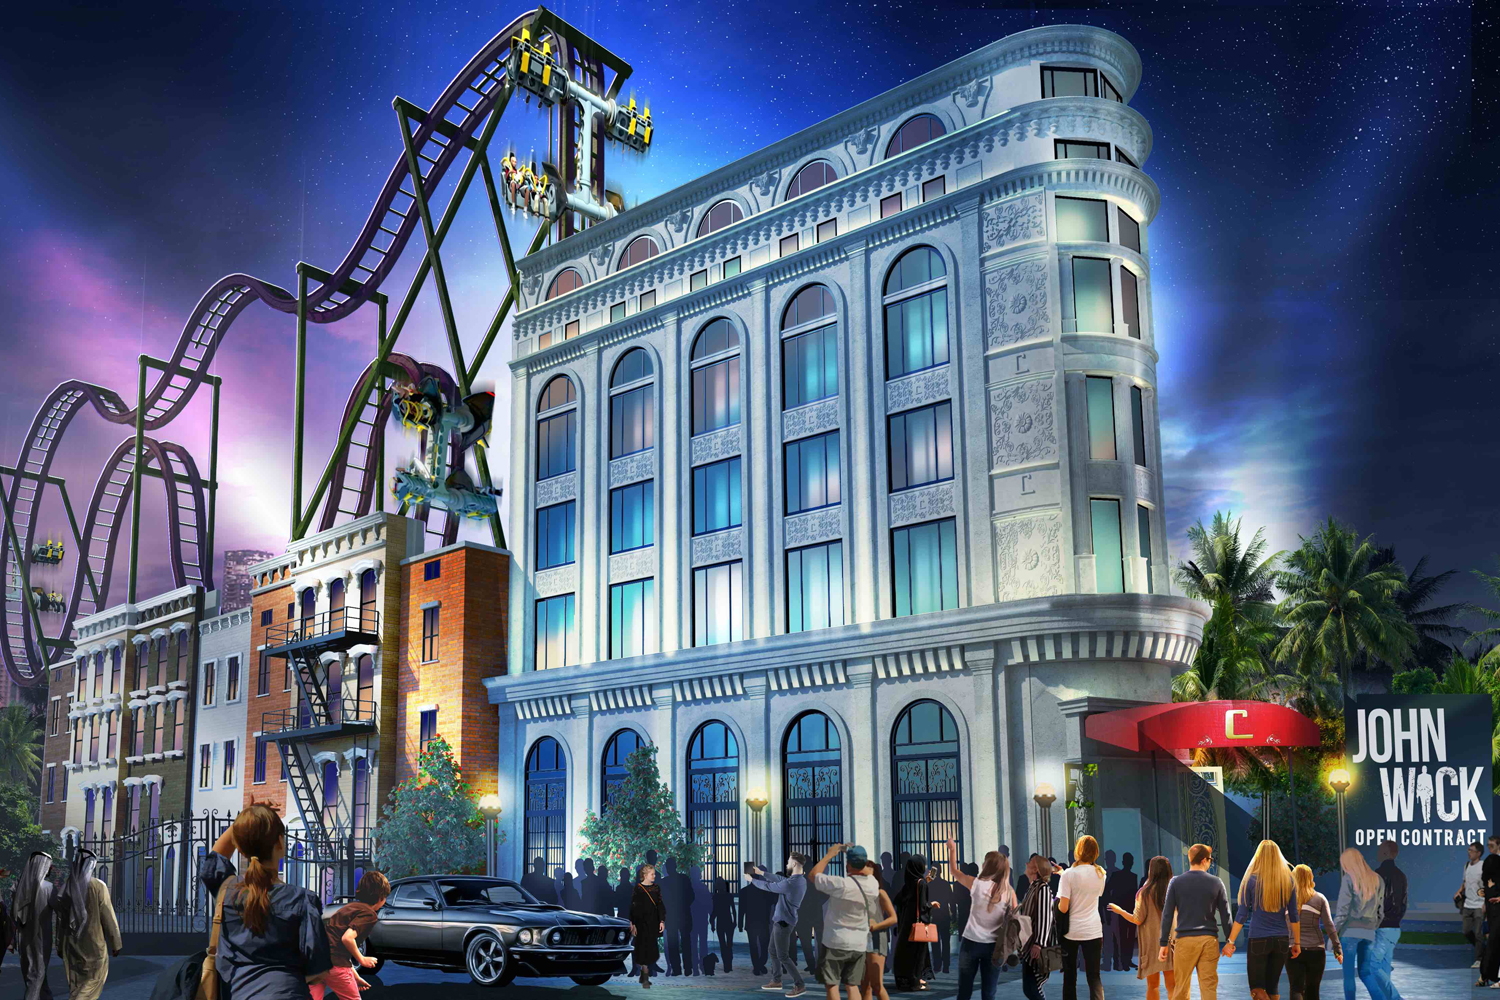 Two brand-new rollercoasters coming to motiongate Dubai | Things To Do